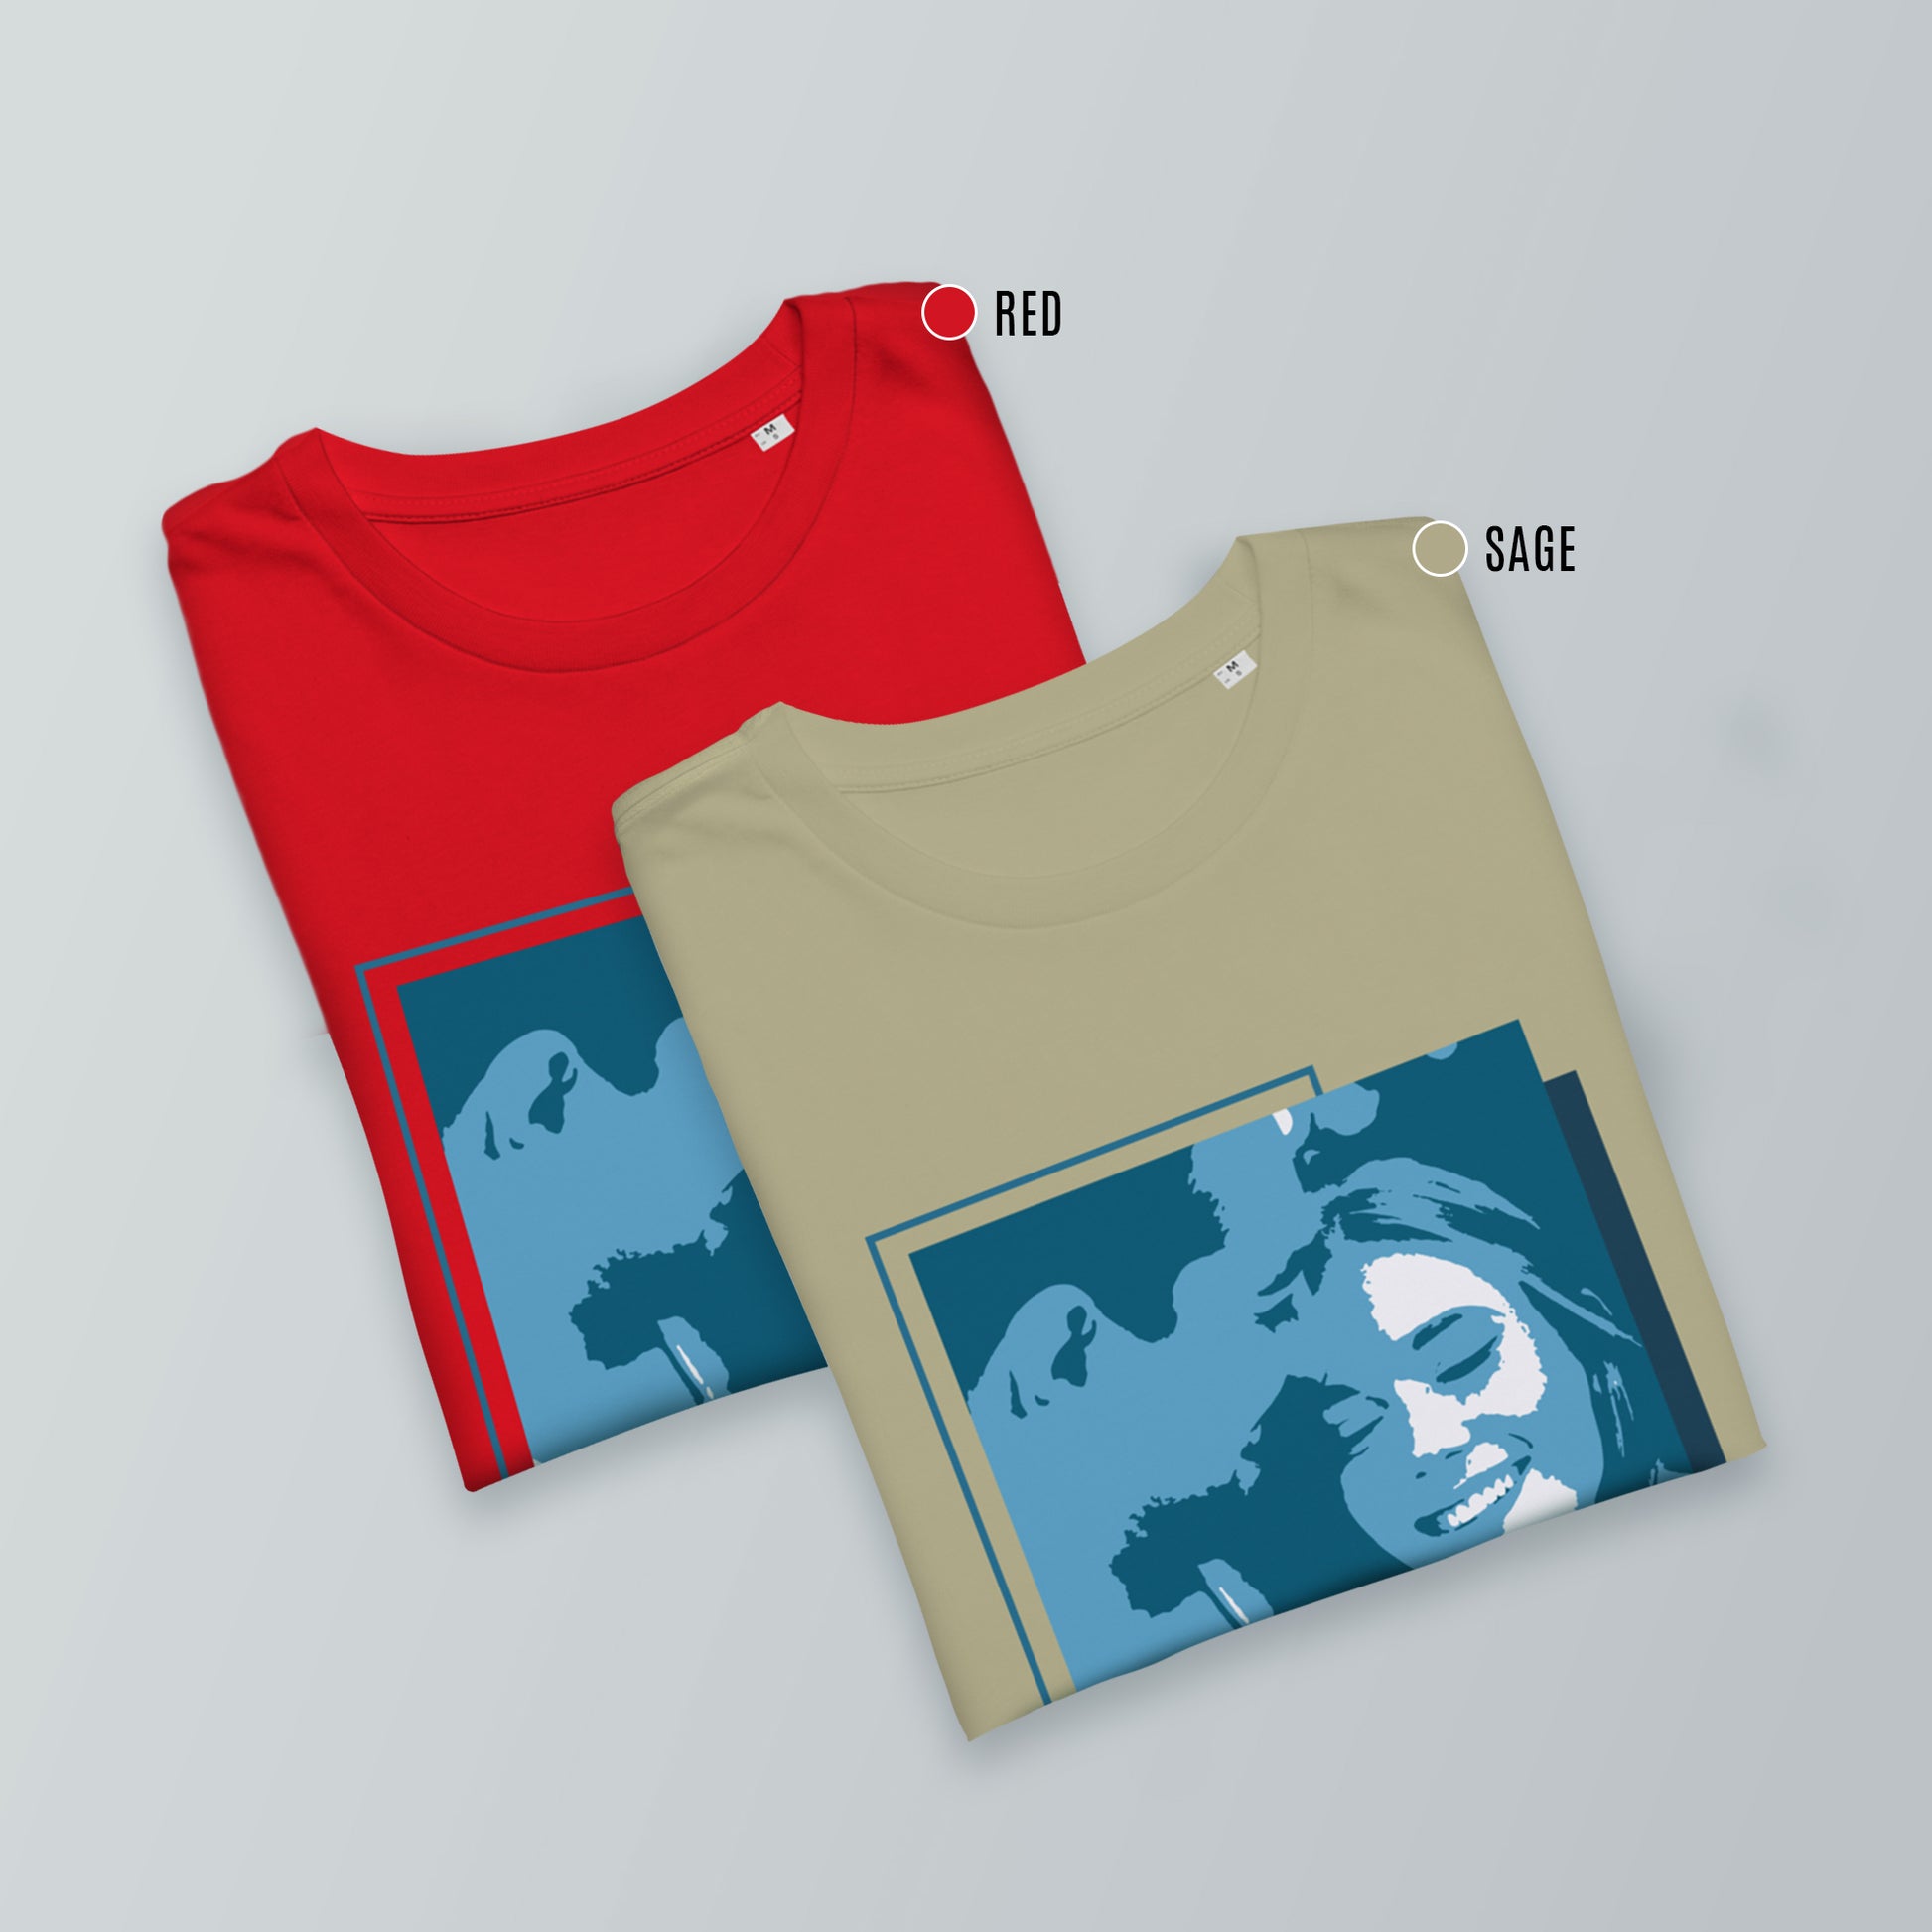 Personalized Men's T-Shirt in red and sage - Blue Portrait | Seepu